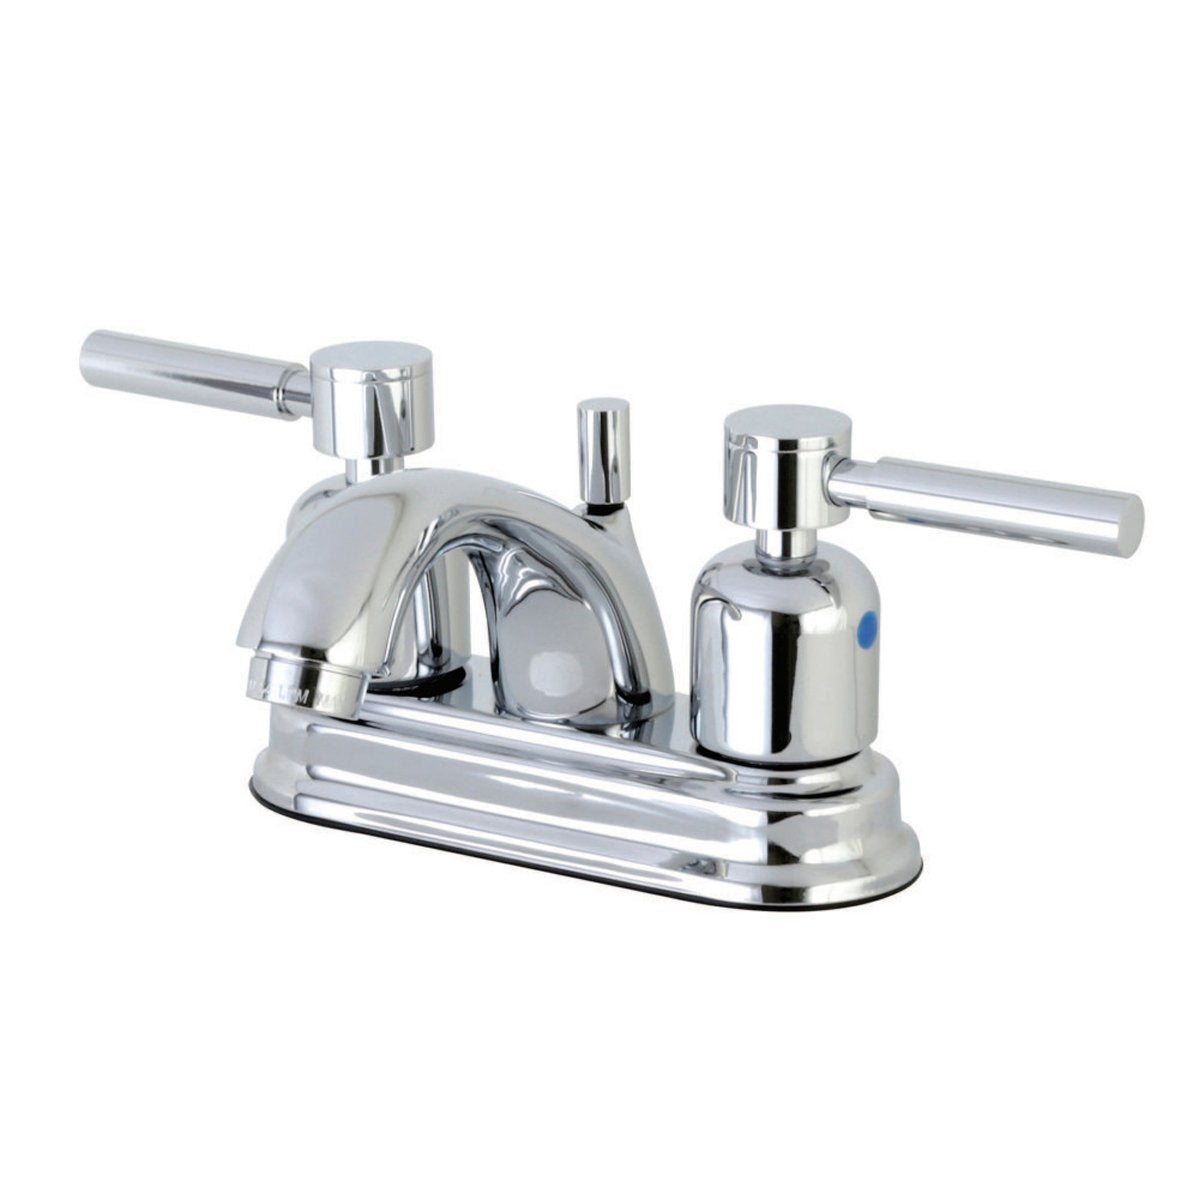 Kingston Brass Concord 4-Inch Centerset 3-Hole Bathroom Faucet with Retail Pop-Up